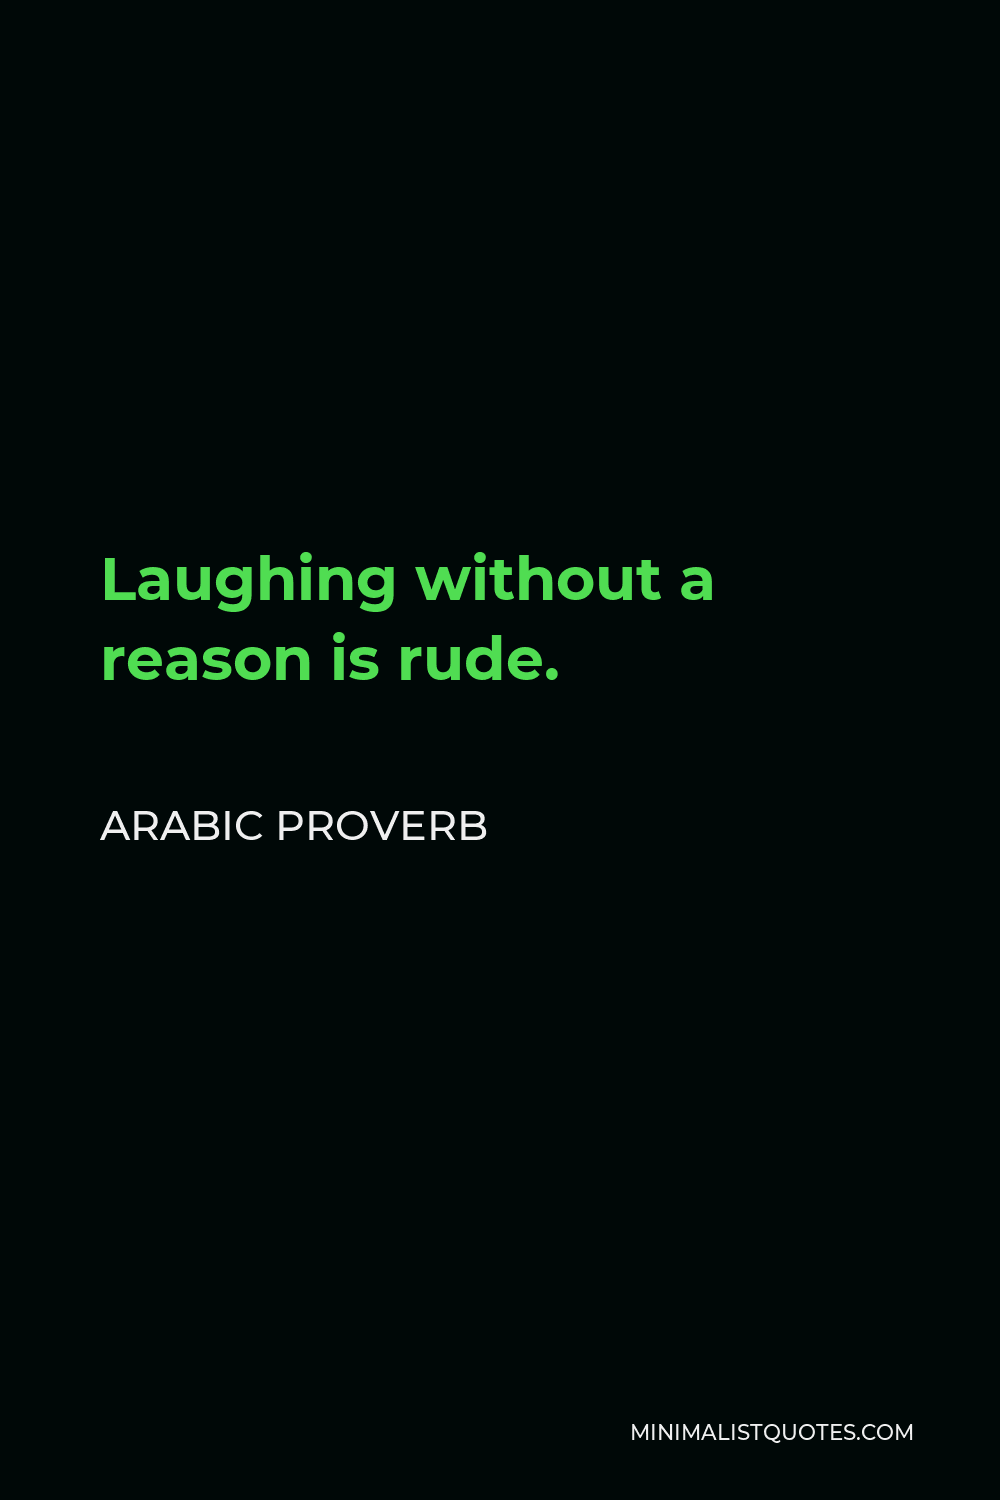 Arabic Proverb Quote - Laughing without a reason is rude.